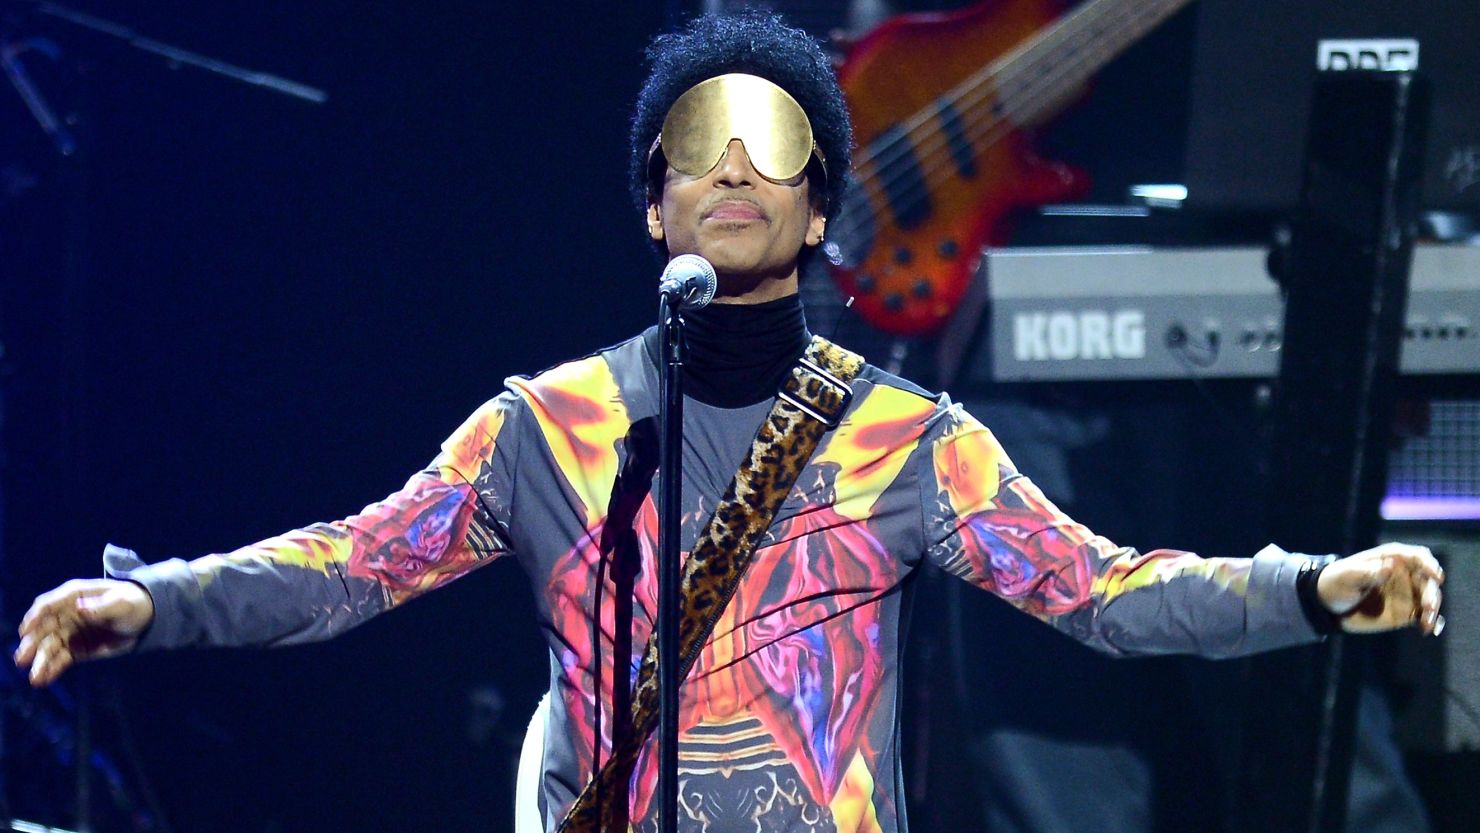 Prince performs with singer Mary J. Blige onstage during the 2012 iHeartRadio Music Festival at the MGM Grand Garden Arena in September 2012 in Las Vegas, Nevada. 